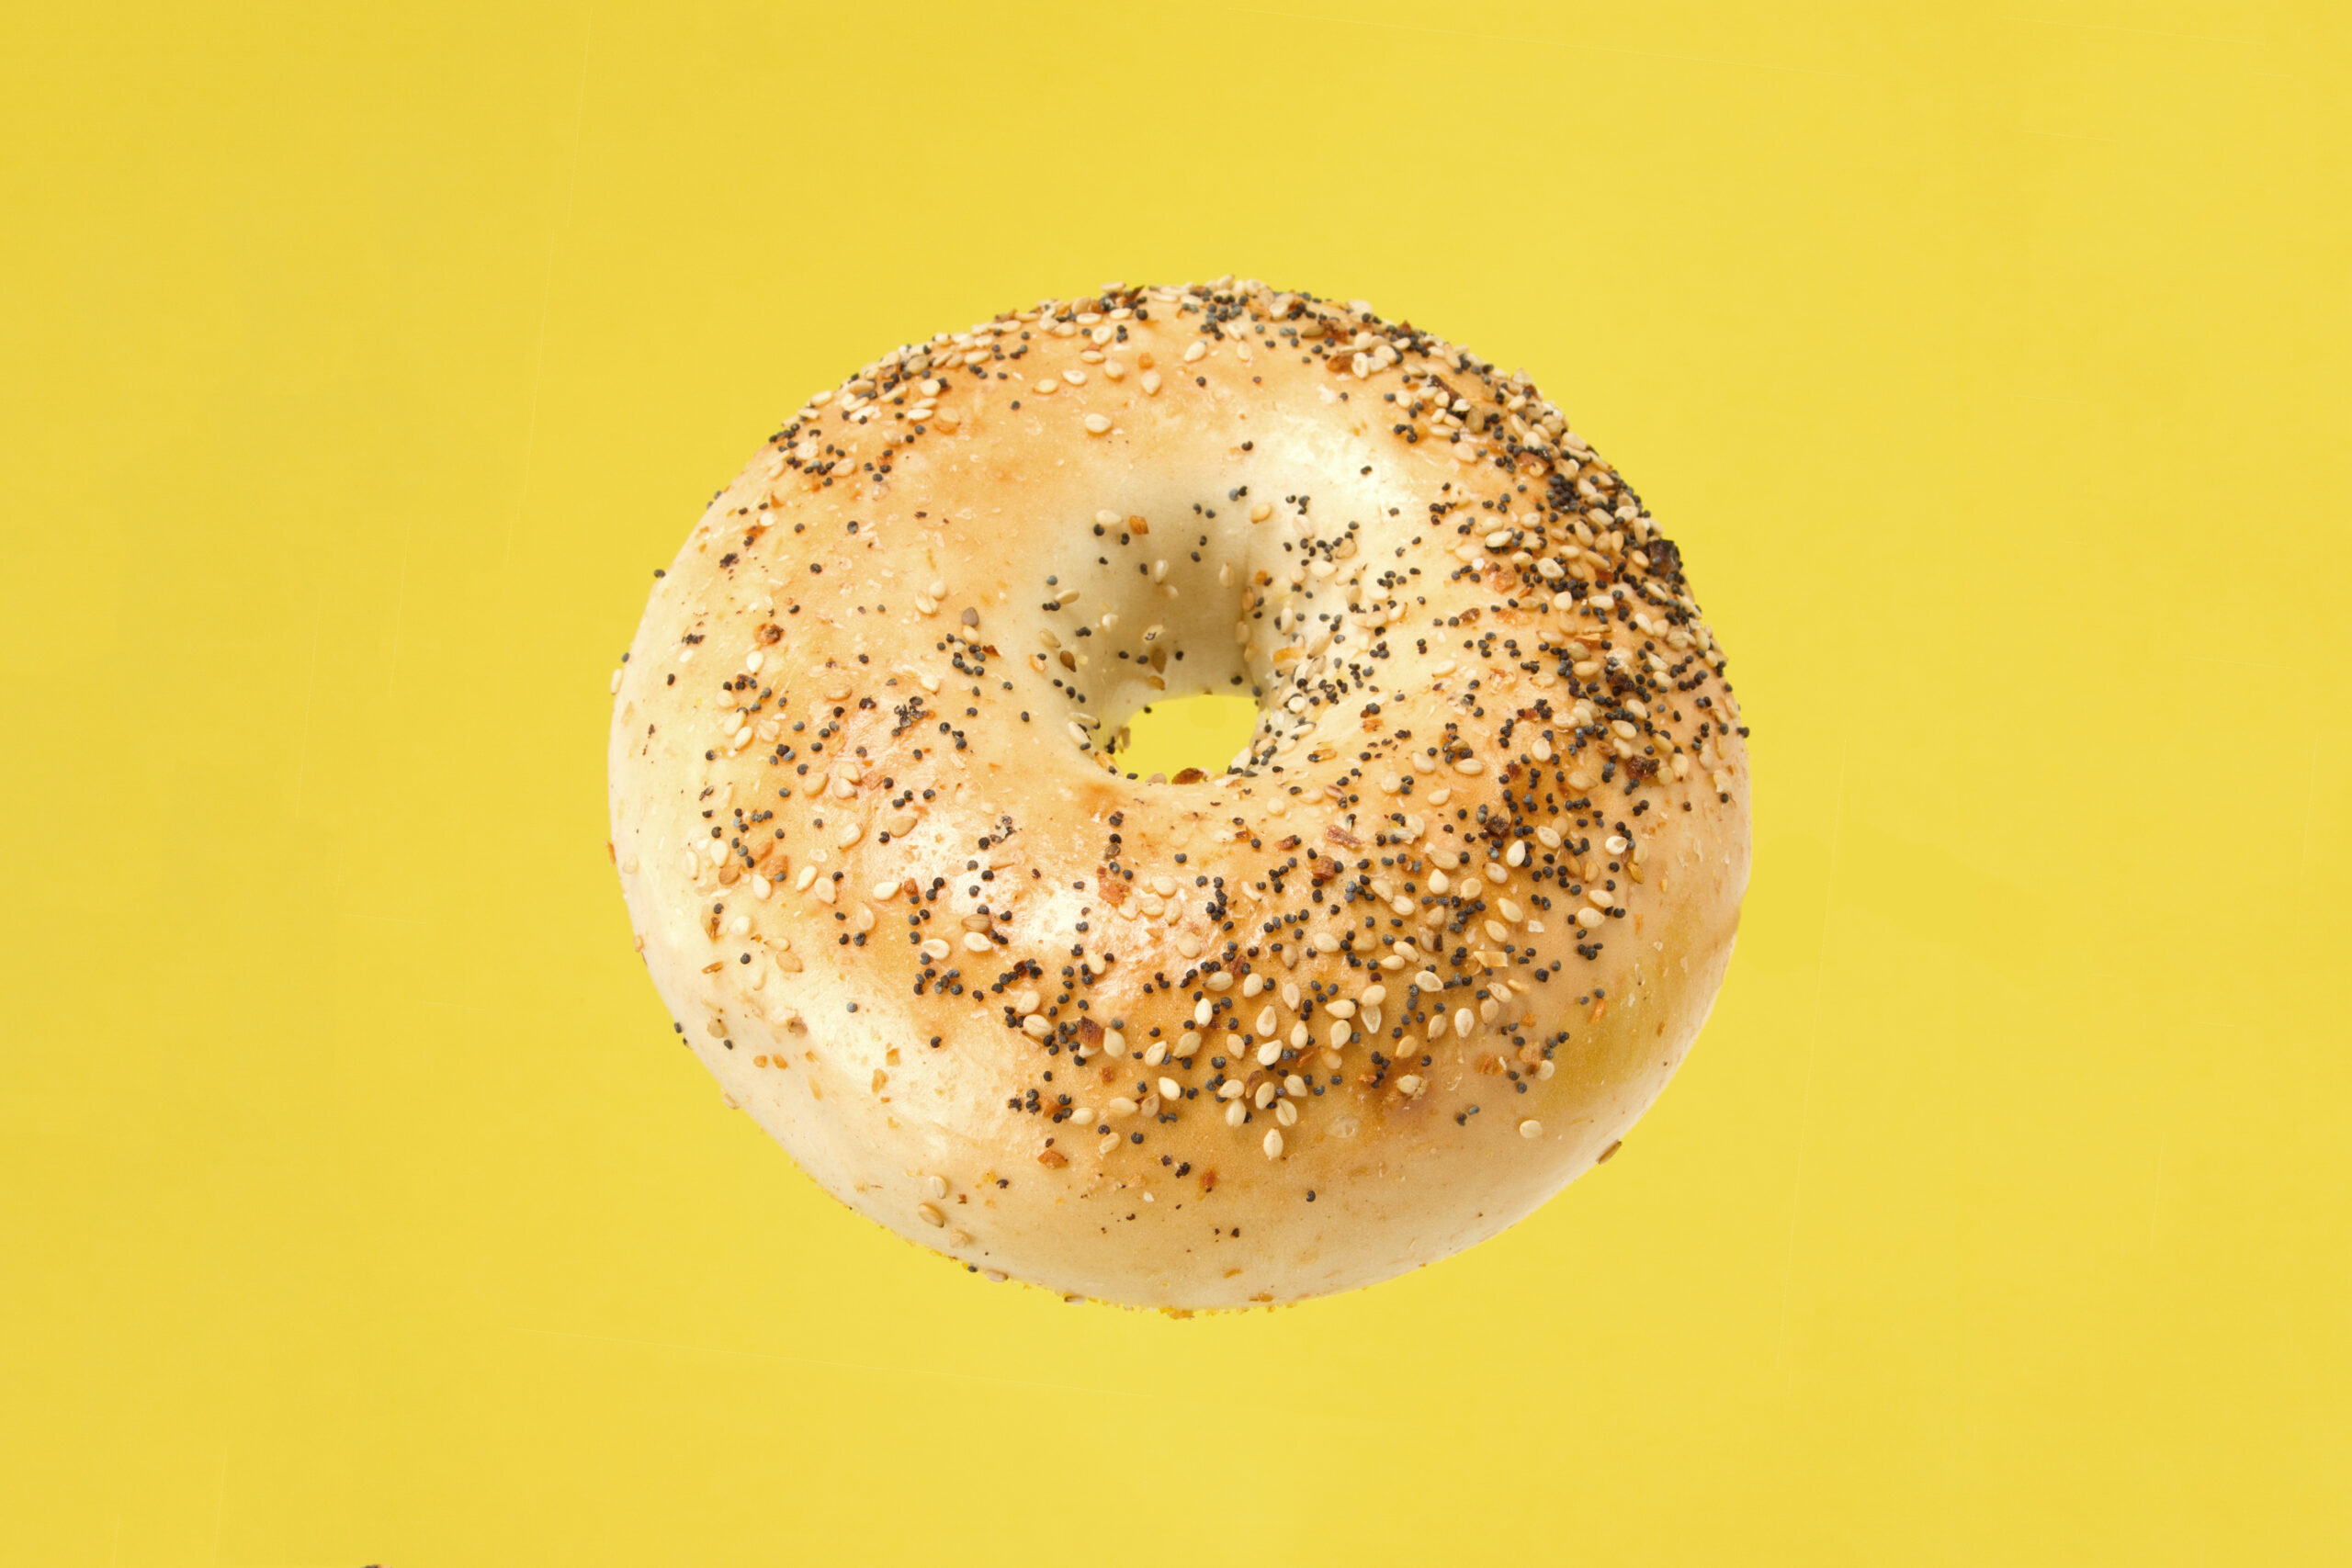 Everything bagel pictured in the center of a pure yellow backdrop.